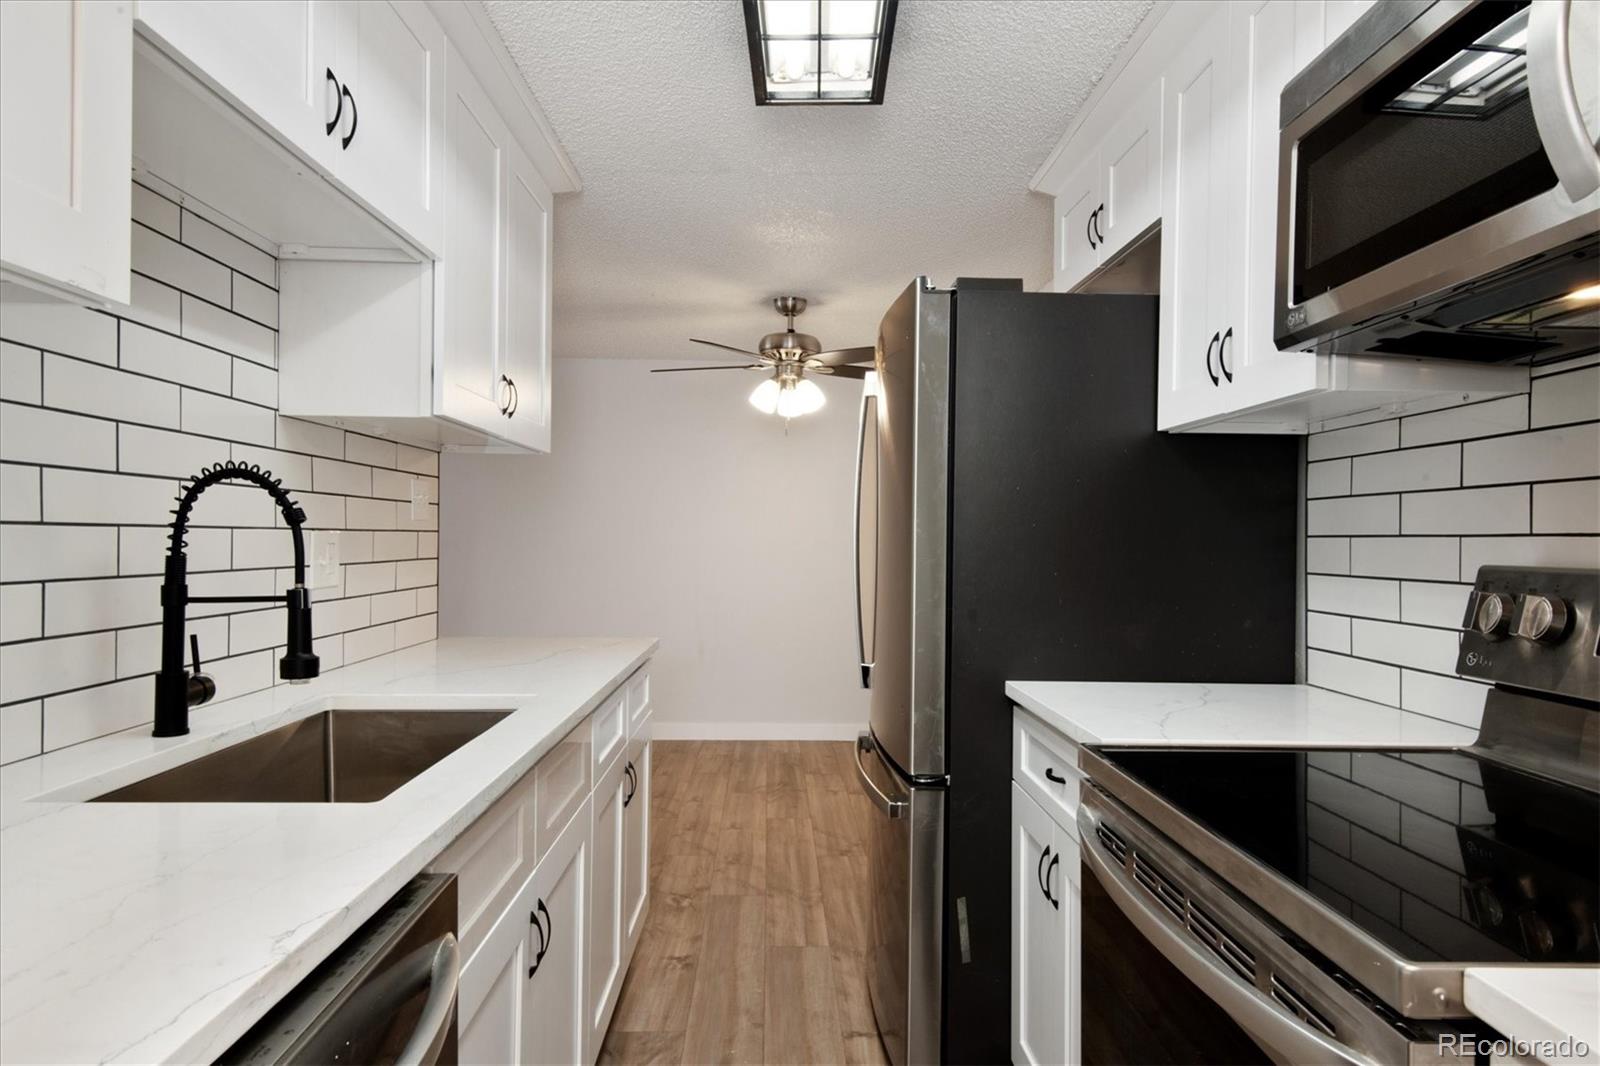 a kitchen with stainless steel appliances kitchen island a refrigerator sink and microwave